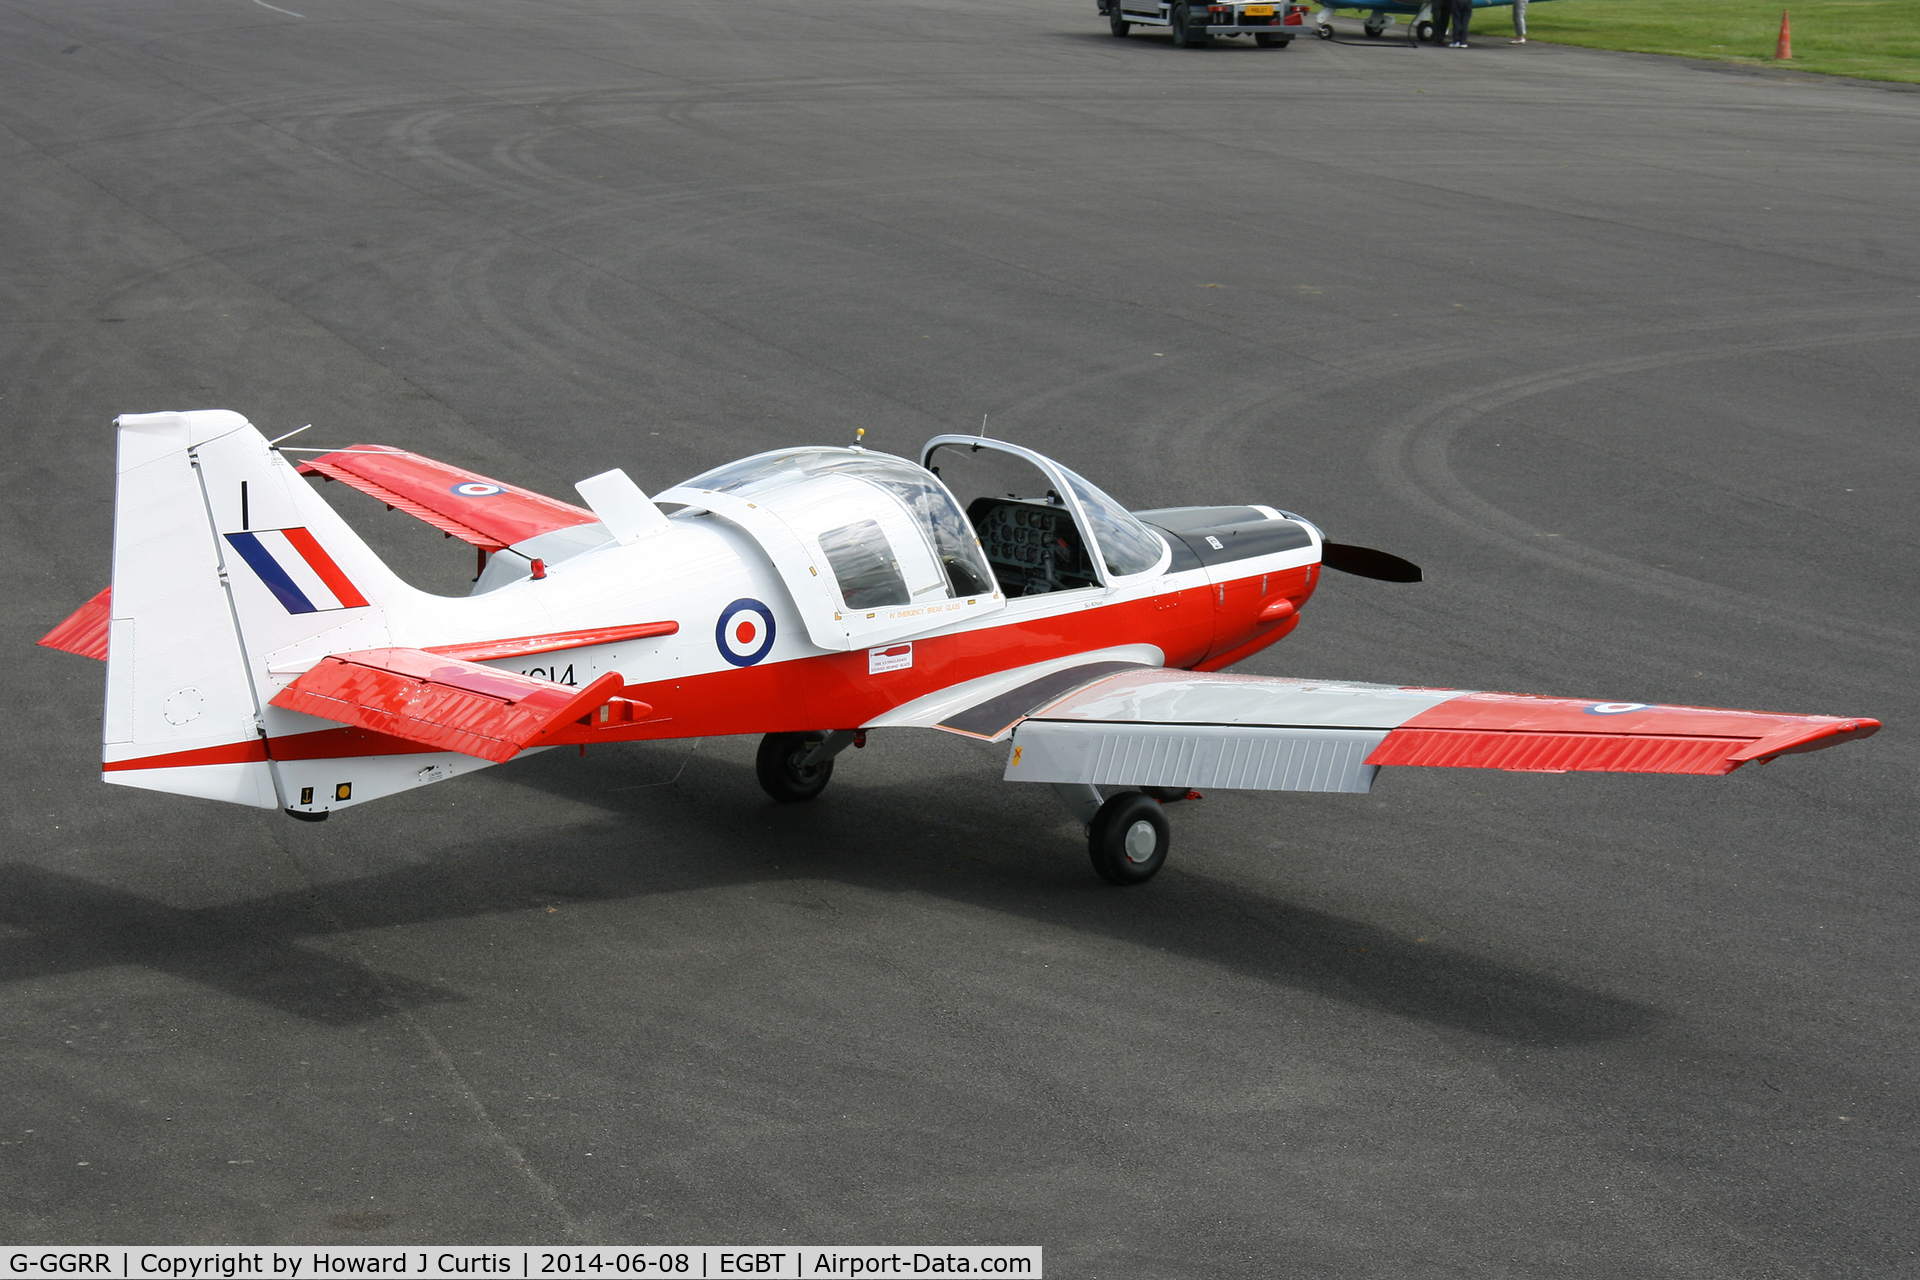 G-GGRR, 1974 Scottish Aviation Bulldog T.1 C/N BH120/272, Painted as XX614. At the Chip and Dog meet, 2014.